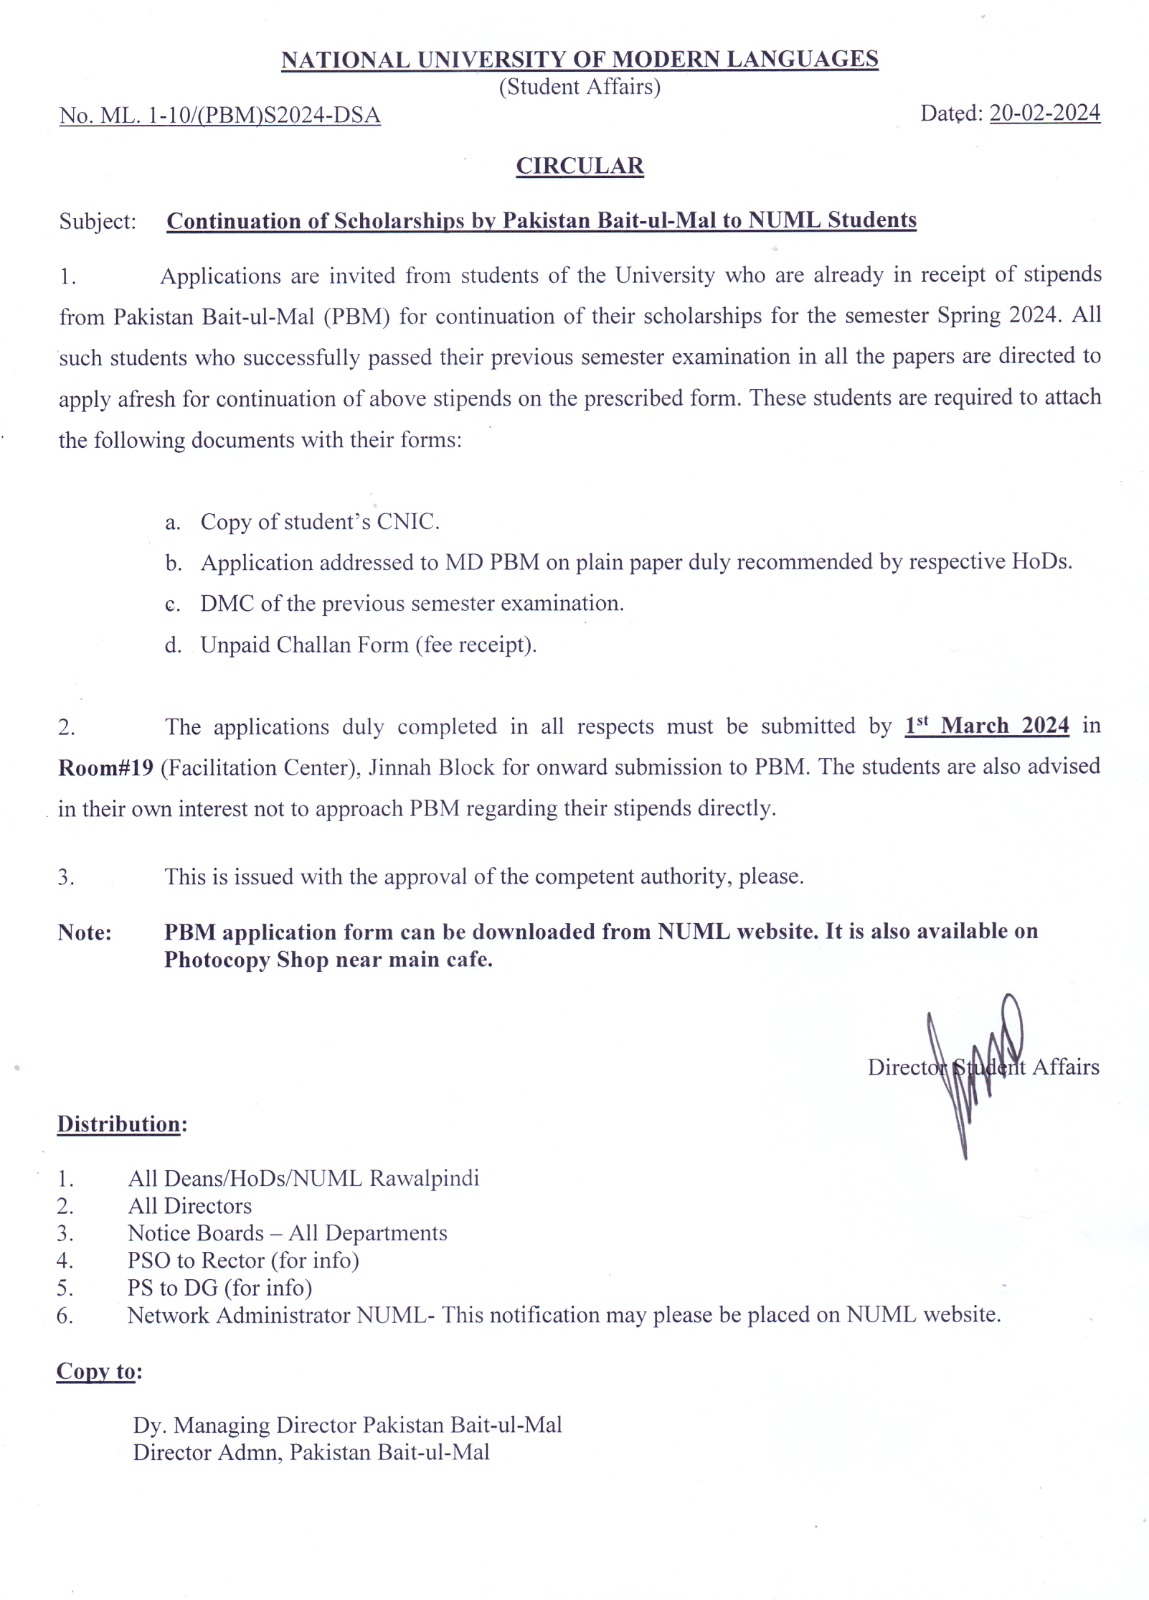 Continuation of Scholarships by Pakistan Bait-ul-Mal to NUML Students